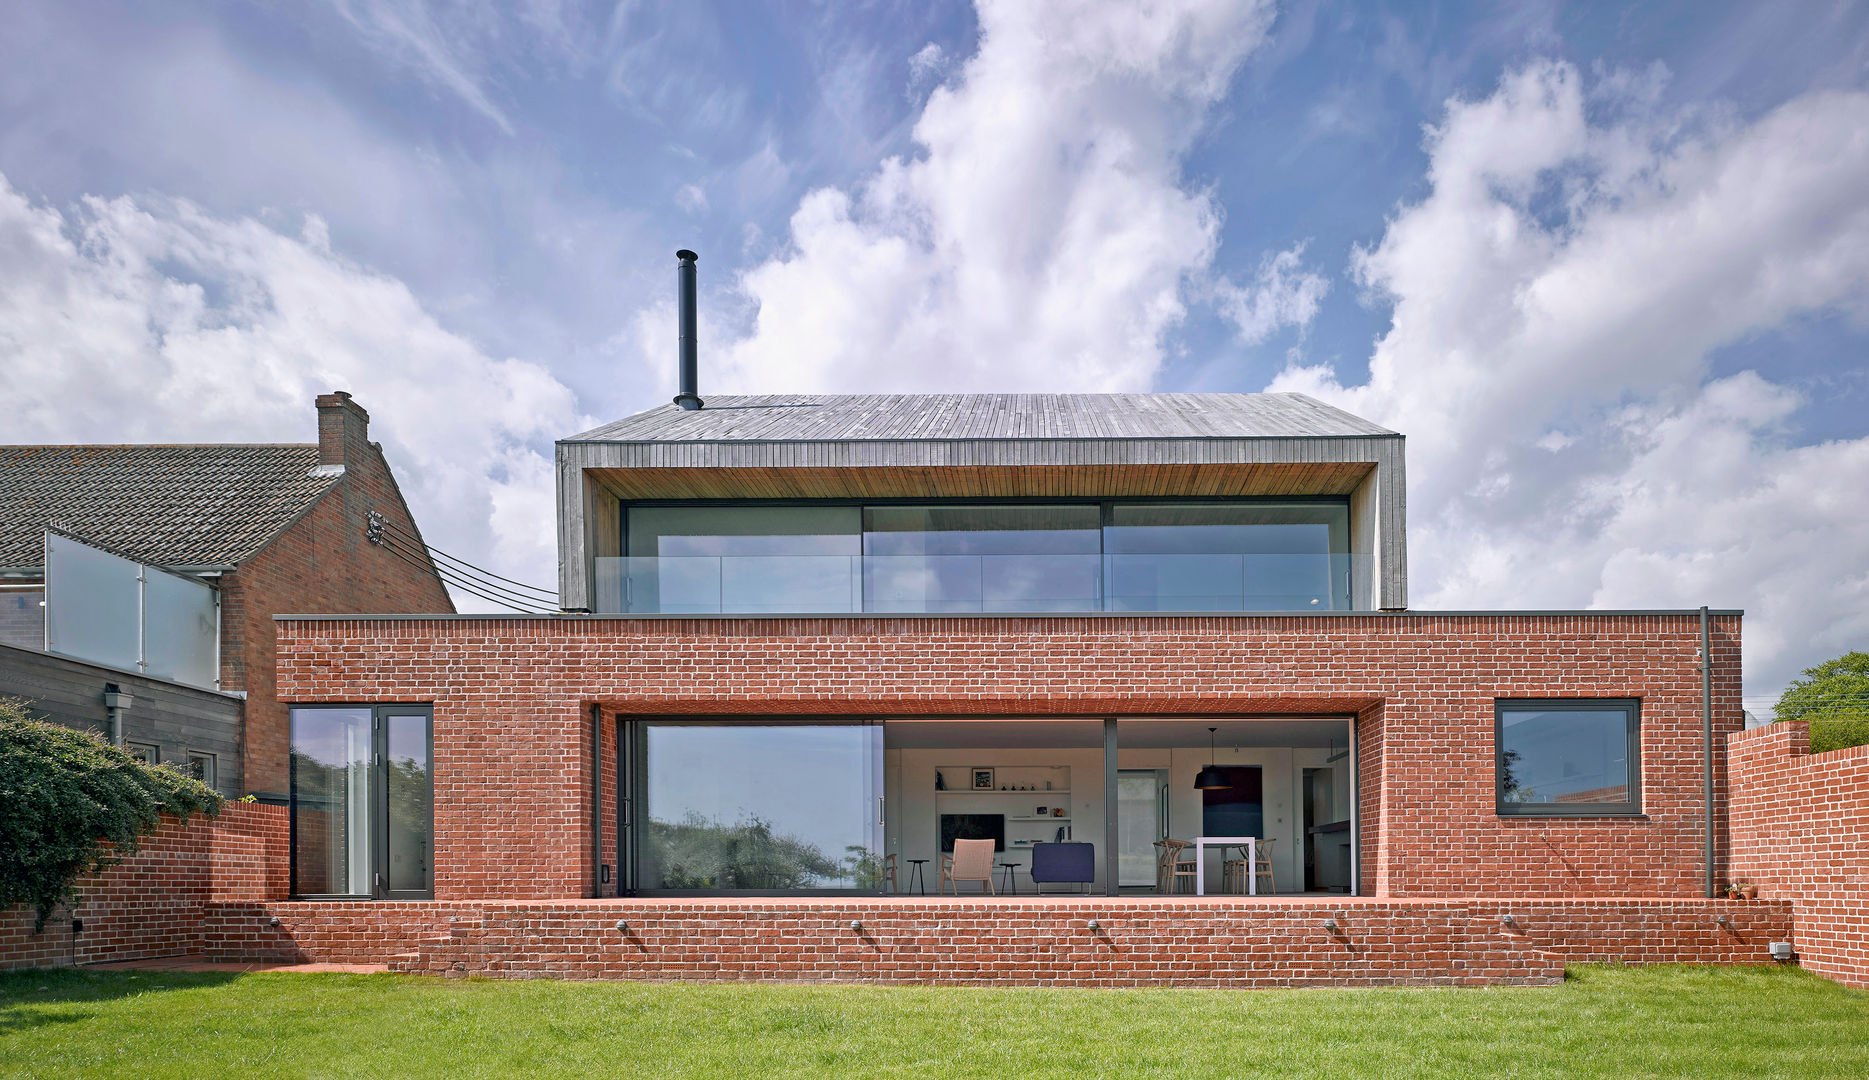 Rear elevation of the house at Broad Street in Suffolk Nash Baker Architects Ltd 모던스타일 주택 벽돌